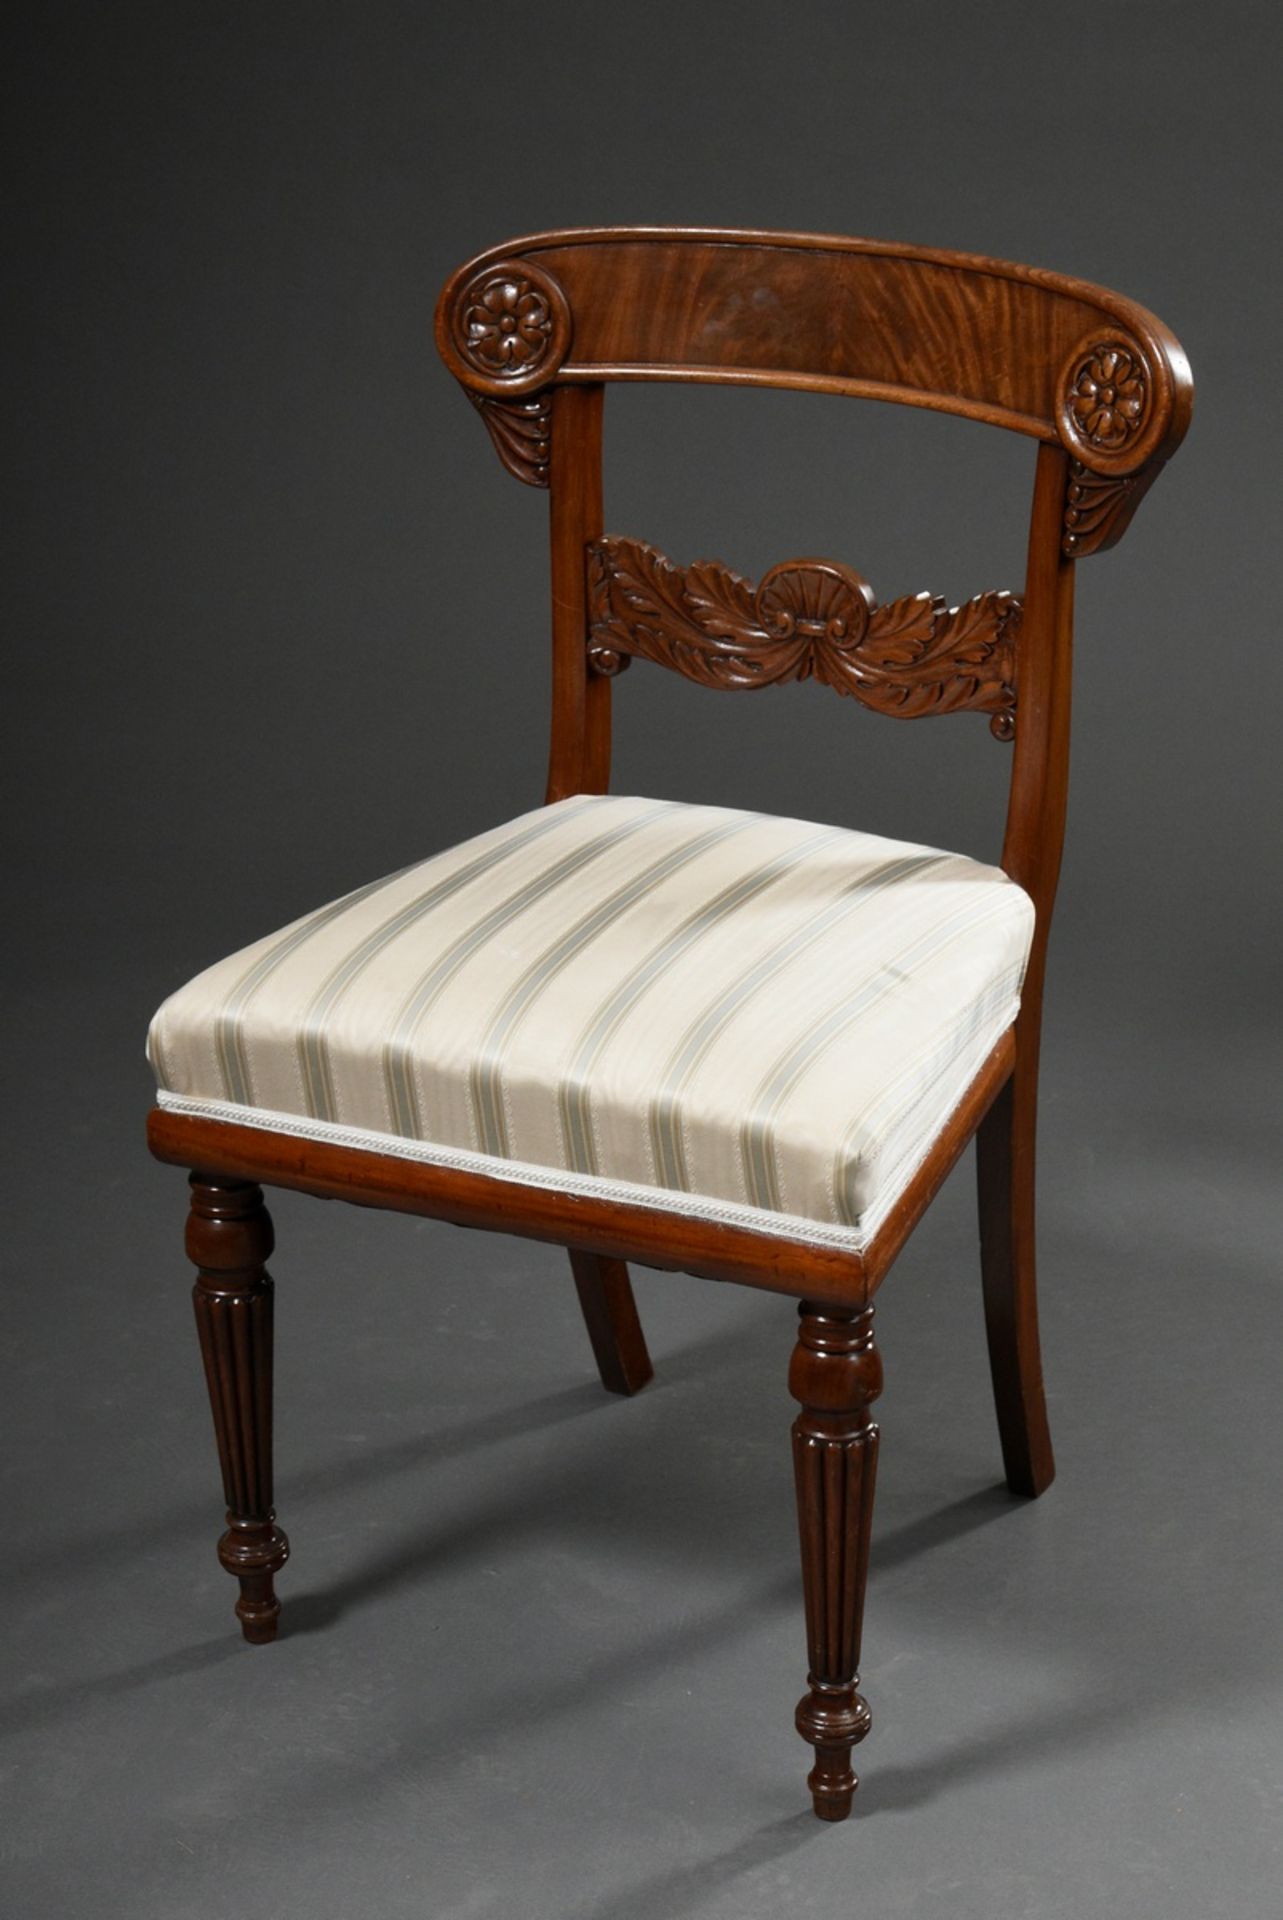 6 Biedermeier chairs with richly carved frame: back board with acanthus leaves and shell motif, sco - Image 3 of 5